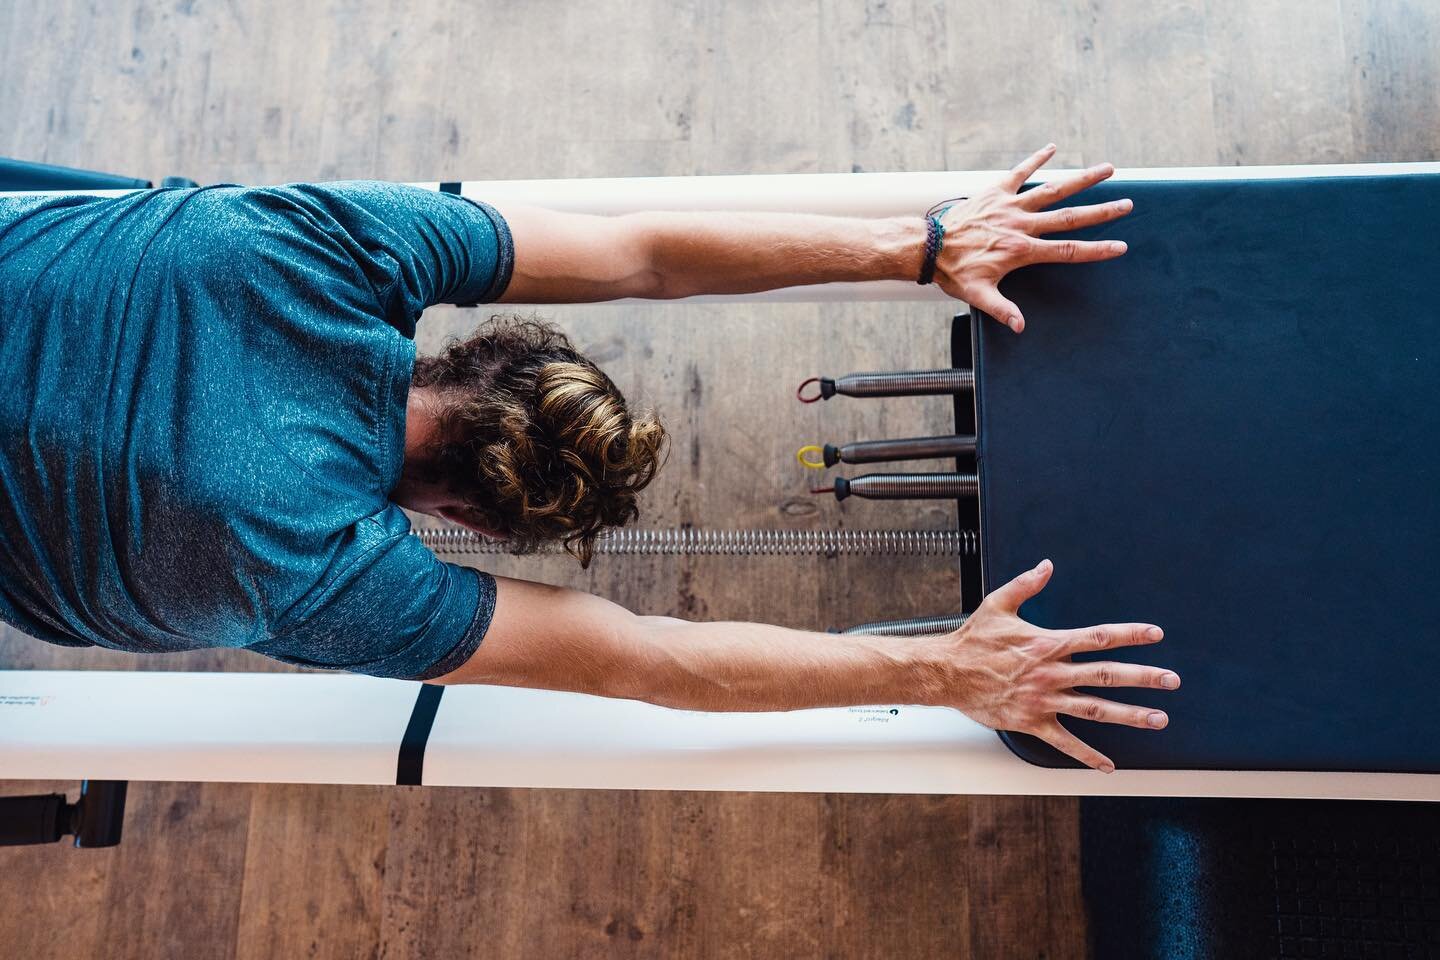 ....That stretch and deep breath after a super long core set, is there anything better?! 
.
.
.
.
.
#core #abworkout #reformer #reformerpilates #pilates #yoga #meditation #movebetter #feelbetter #breath #stretch